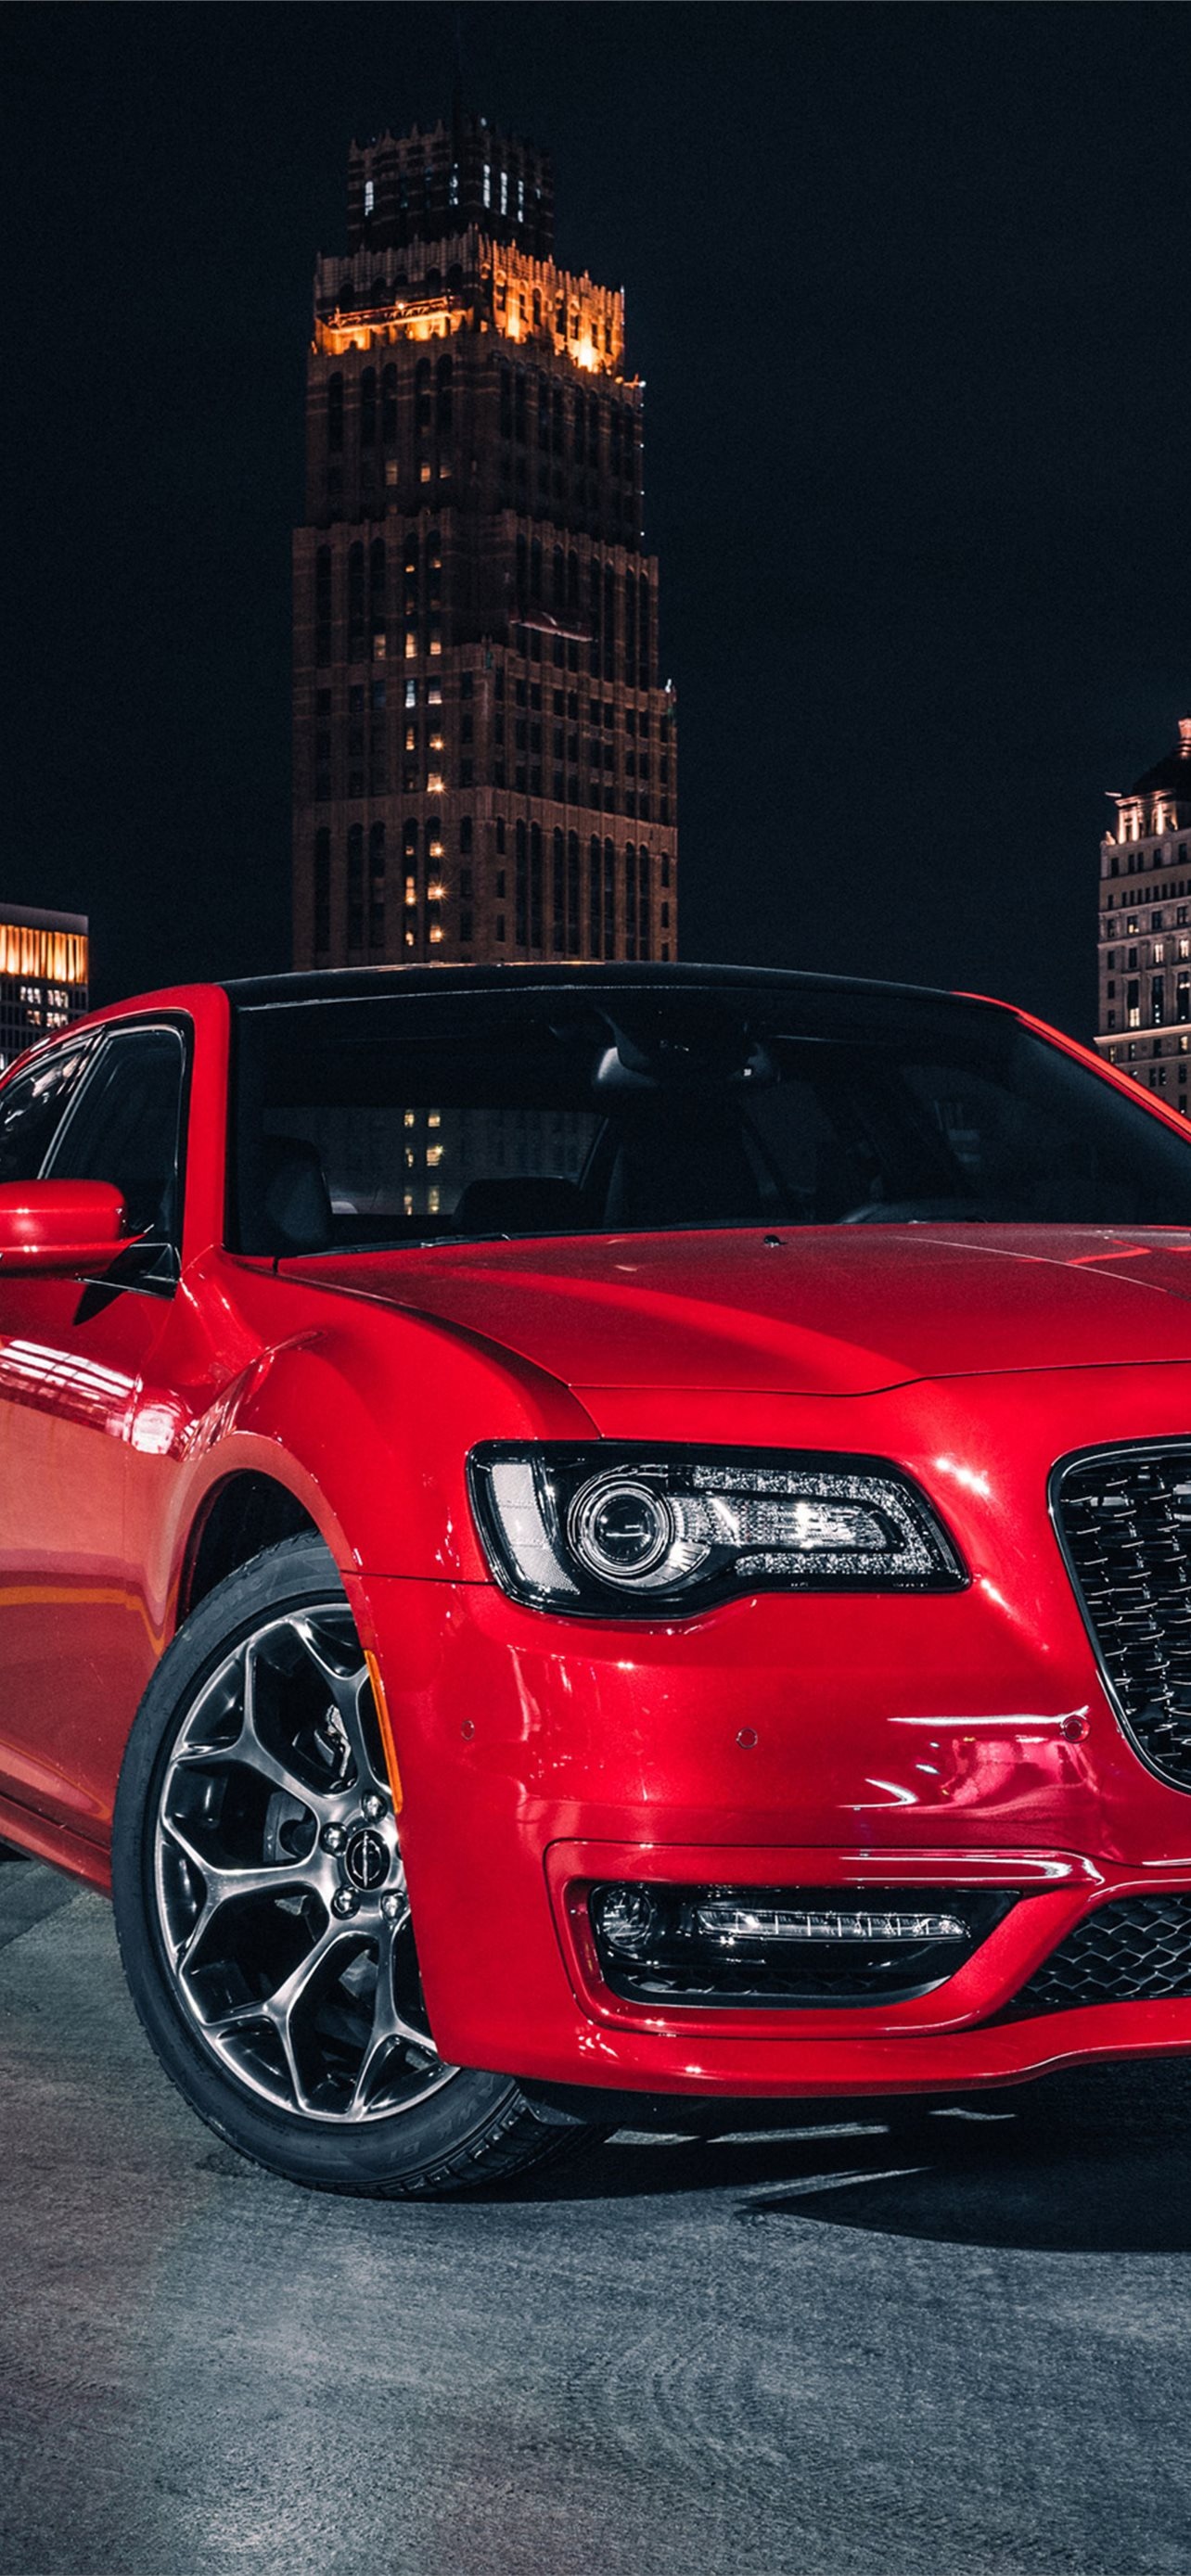 Chrysler, Auto, Chrysler cars, iPhone wallpapers, 1290x2780 HD Phone